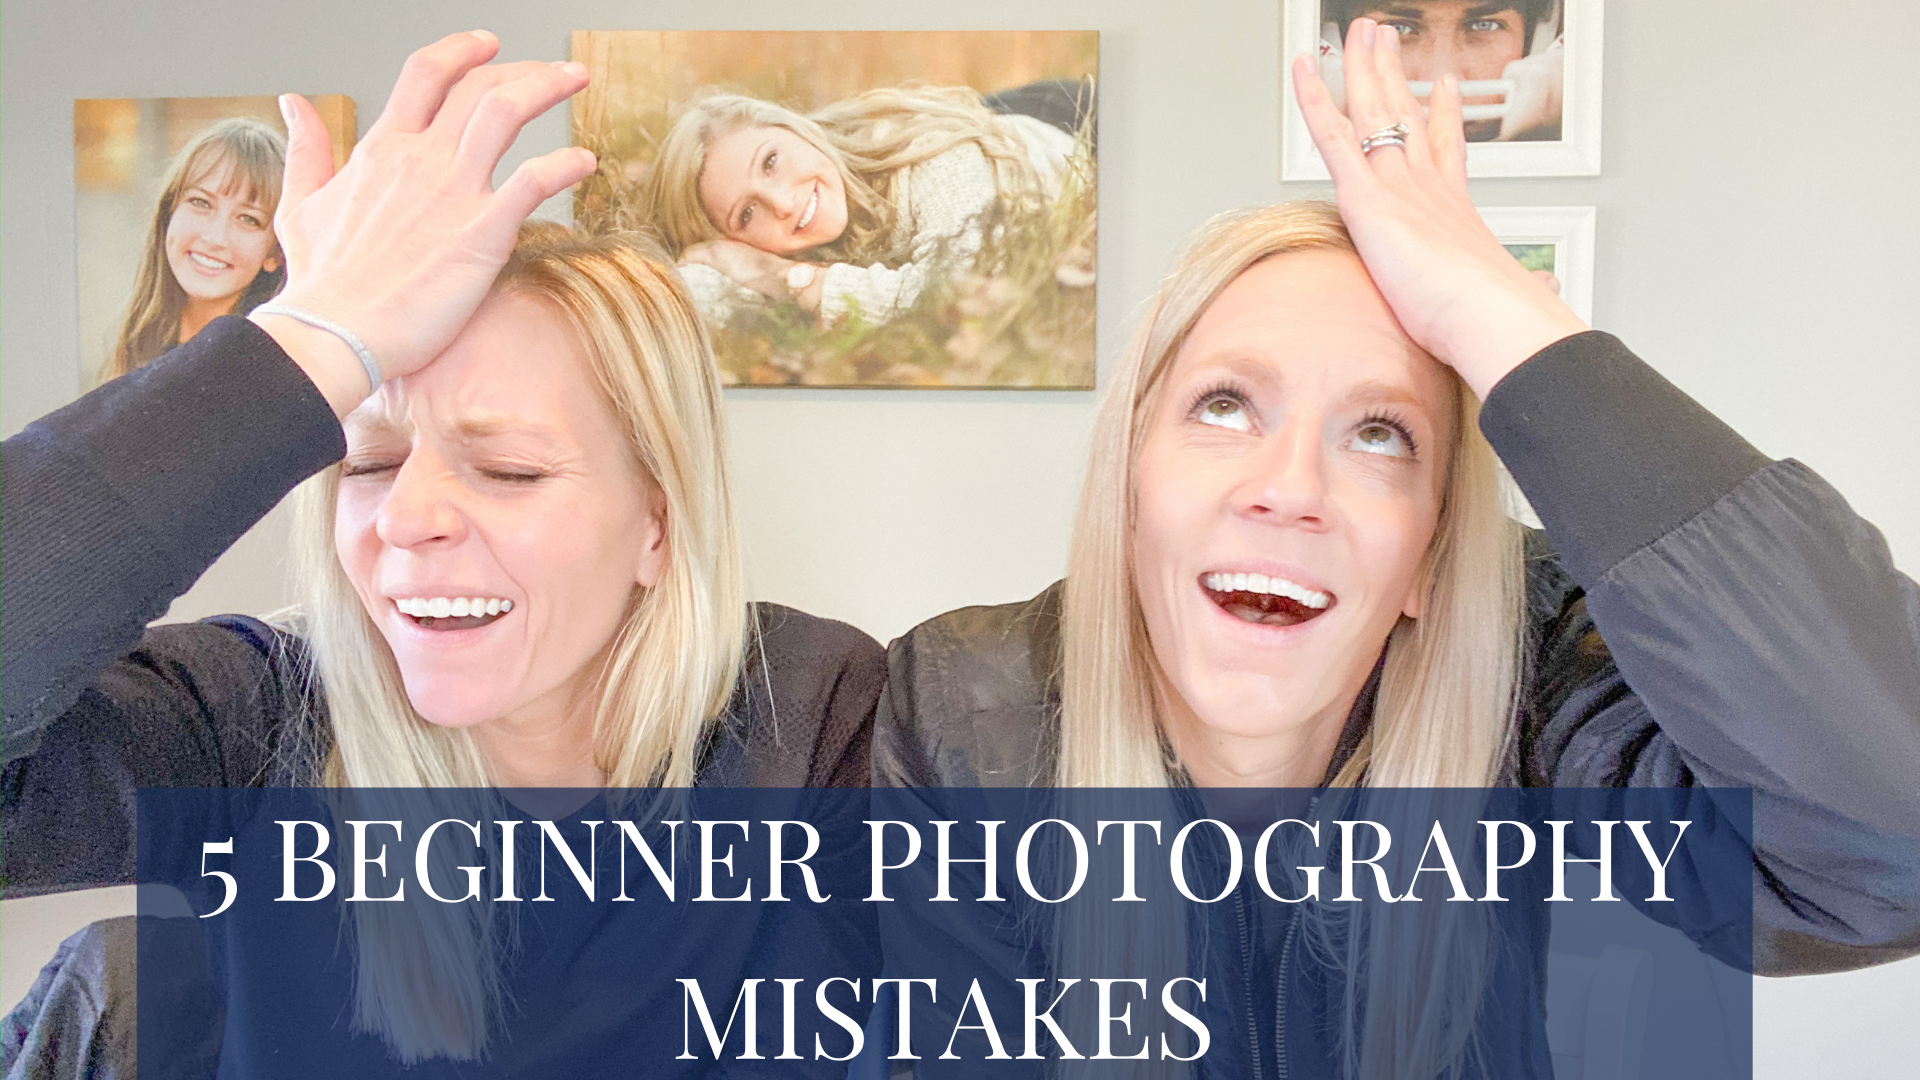 5 BEGINNER PHOTOGRAPHY MISTAKES + HOW TO SOLVE THEM